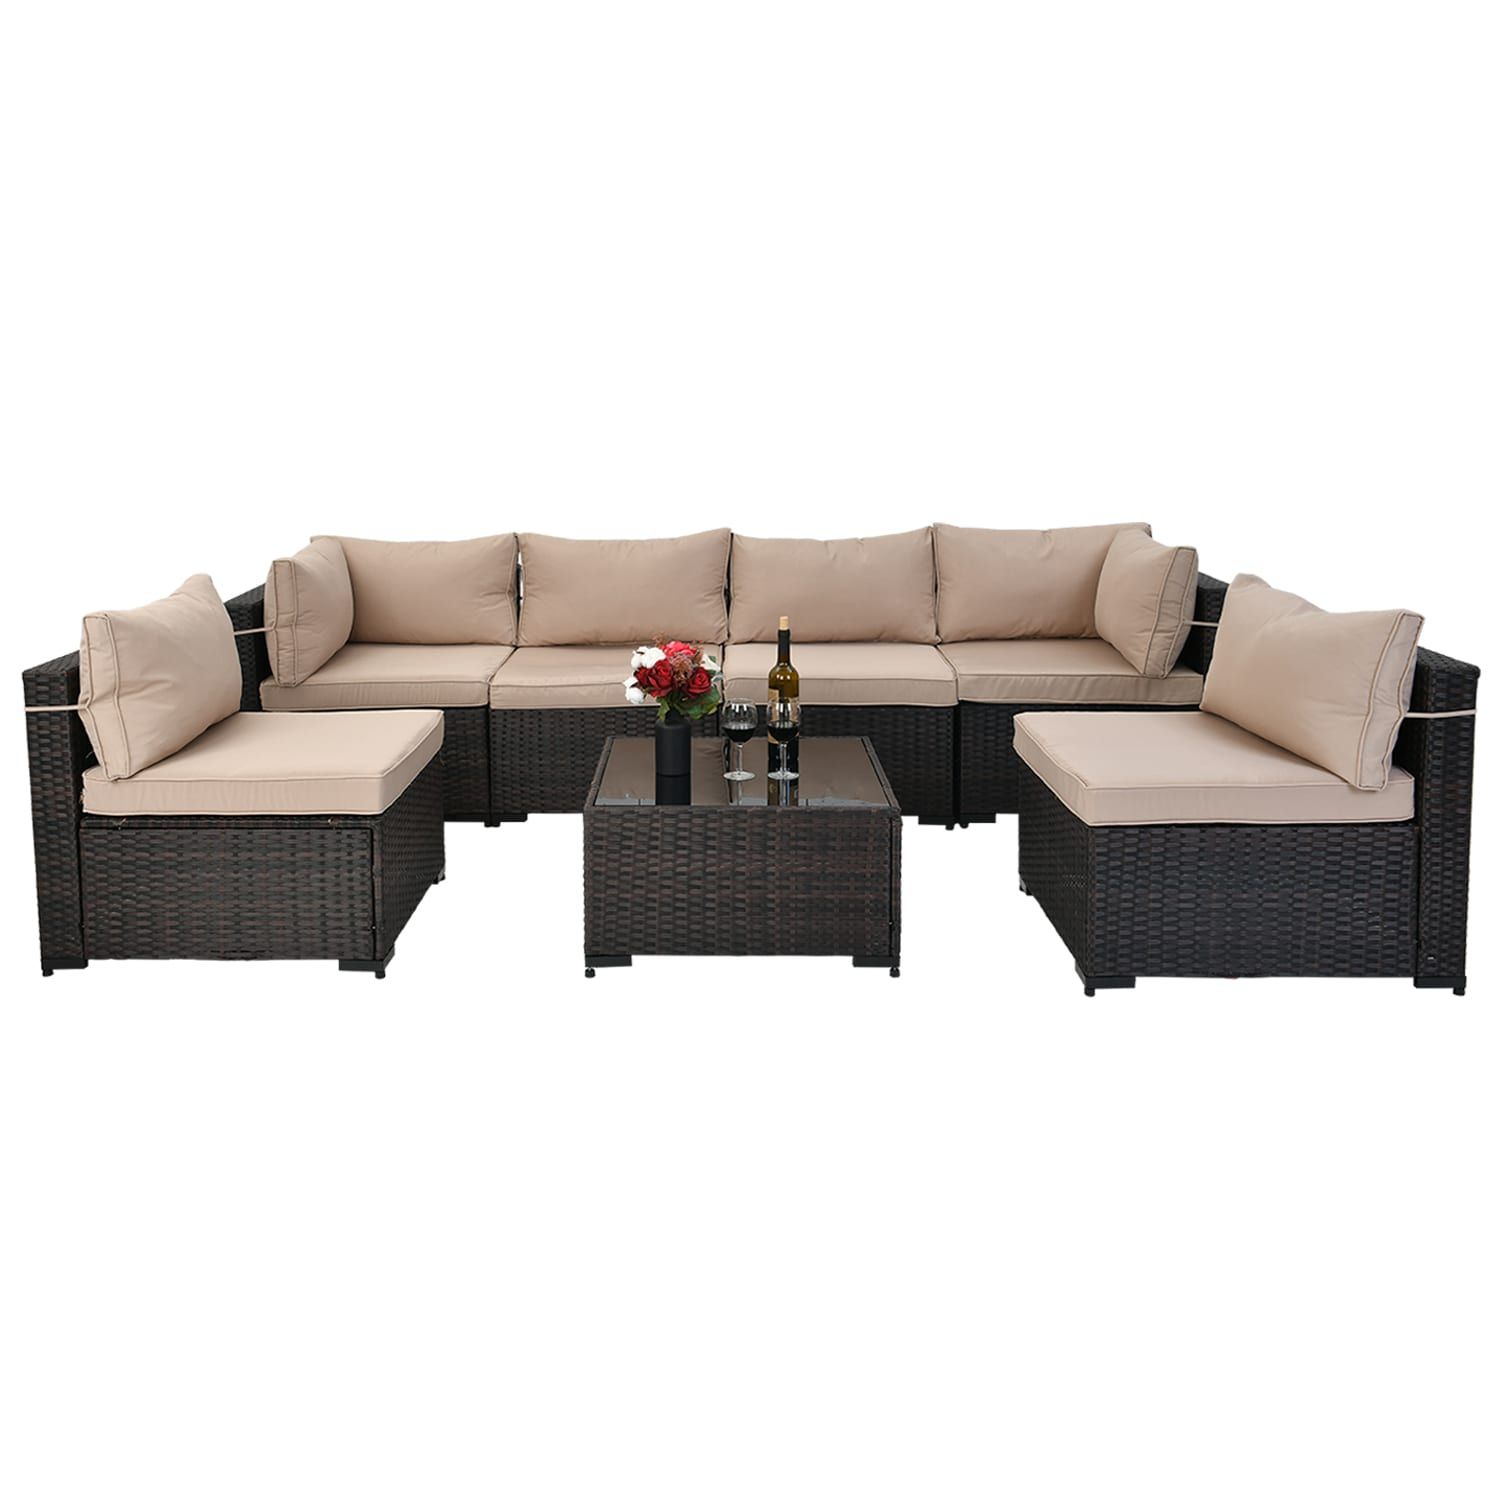 Patio Conversation Set 7 Piece Rattan Patio Conversation Set With Off White  Cushions In The Patio Conversation Sets Department At Lowes Regarding 7 Piece Rattan Sectional Sofa Set (View 15 of 15)